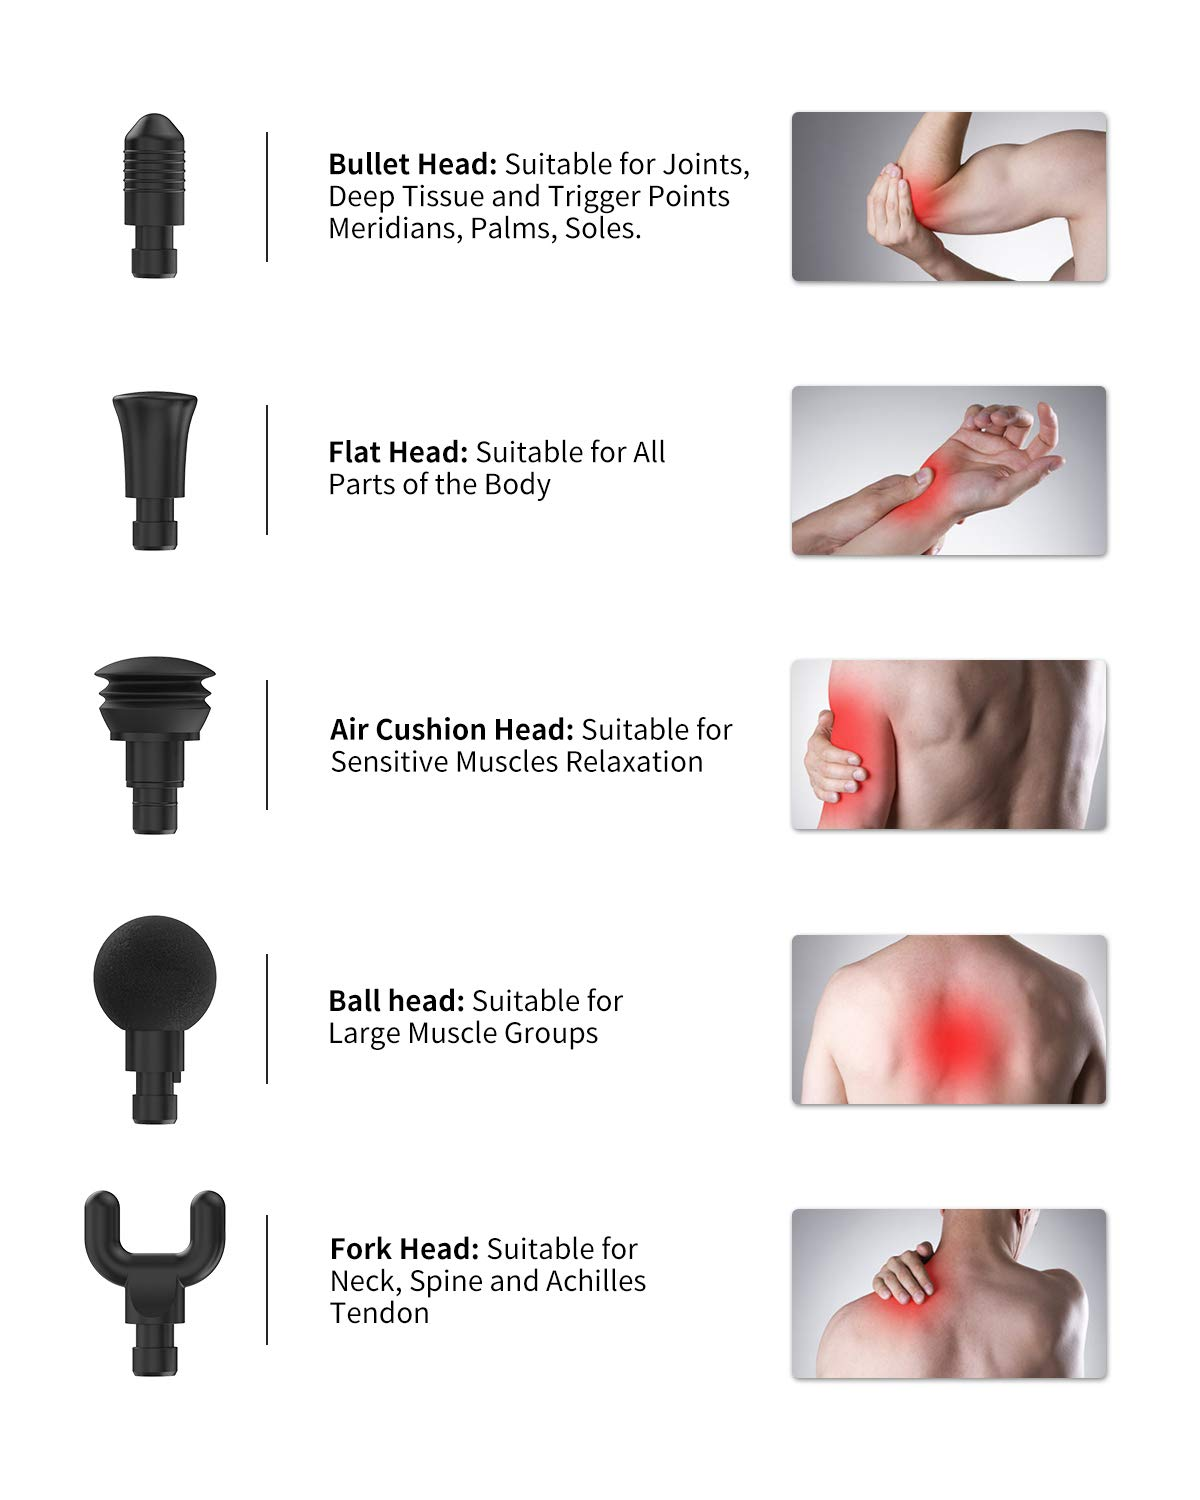 The image displays various RENPHO Massage Gun attachments with corresponding use cases: a bullet head for trigger points, a flat head for all body parts, a cushion head for sensitive muscles, a ball head for large muscle areas.